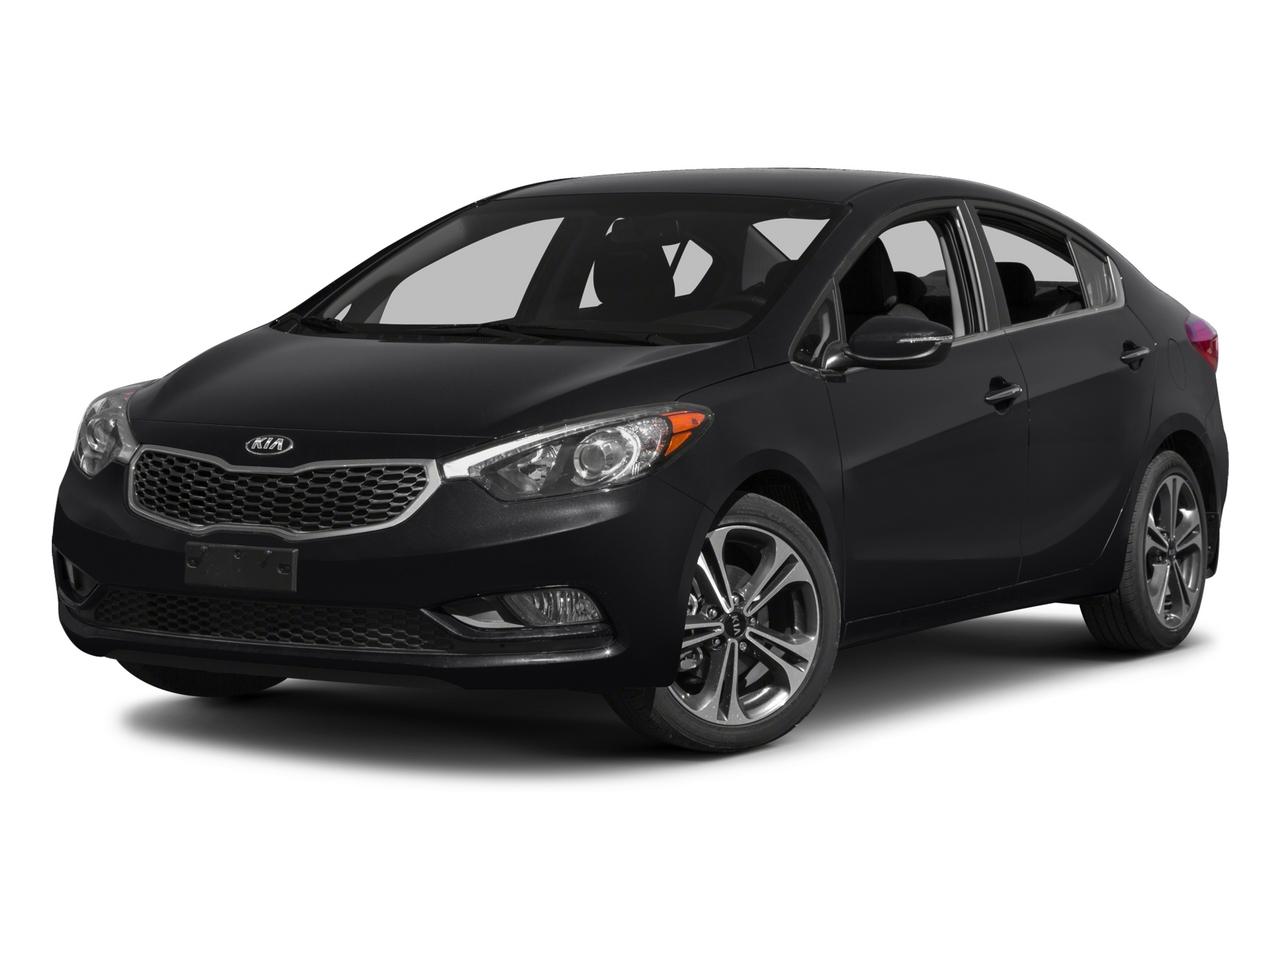 2015 Kia Forte Vehicle Photo in Forest Park, IL 60130